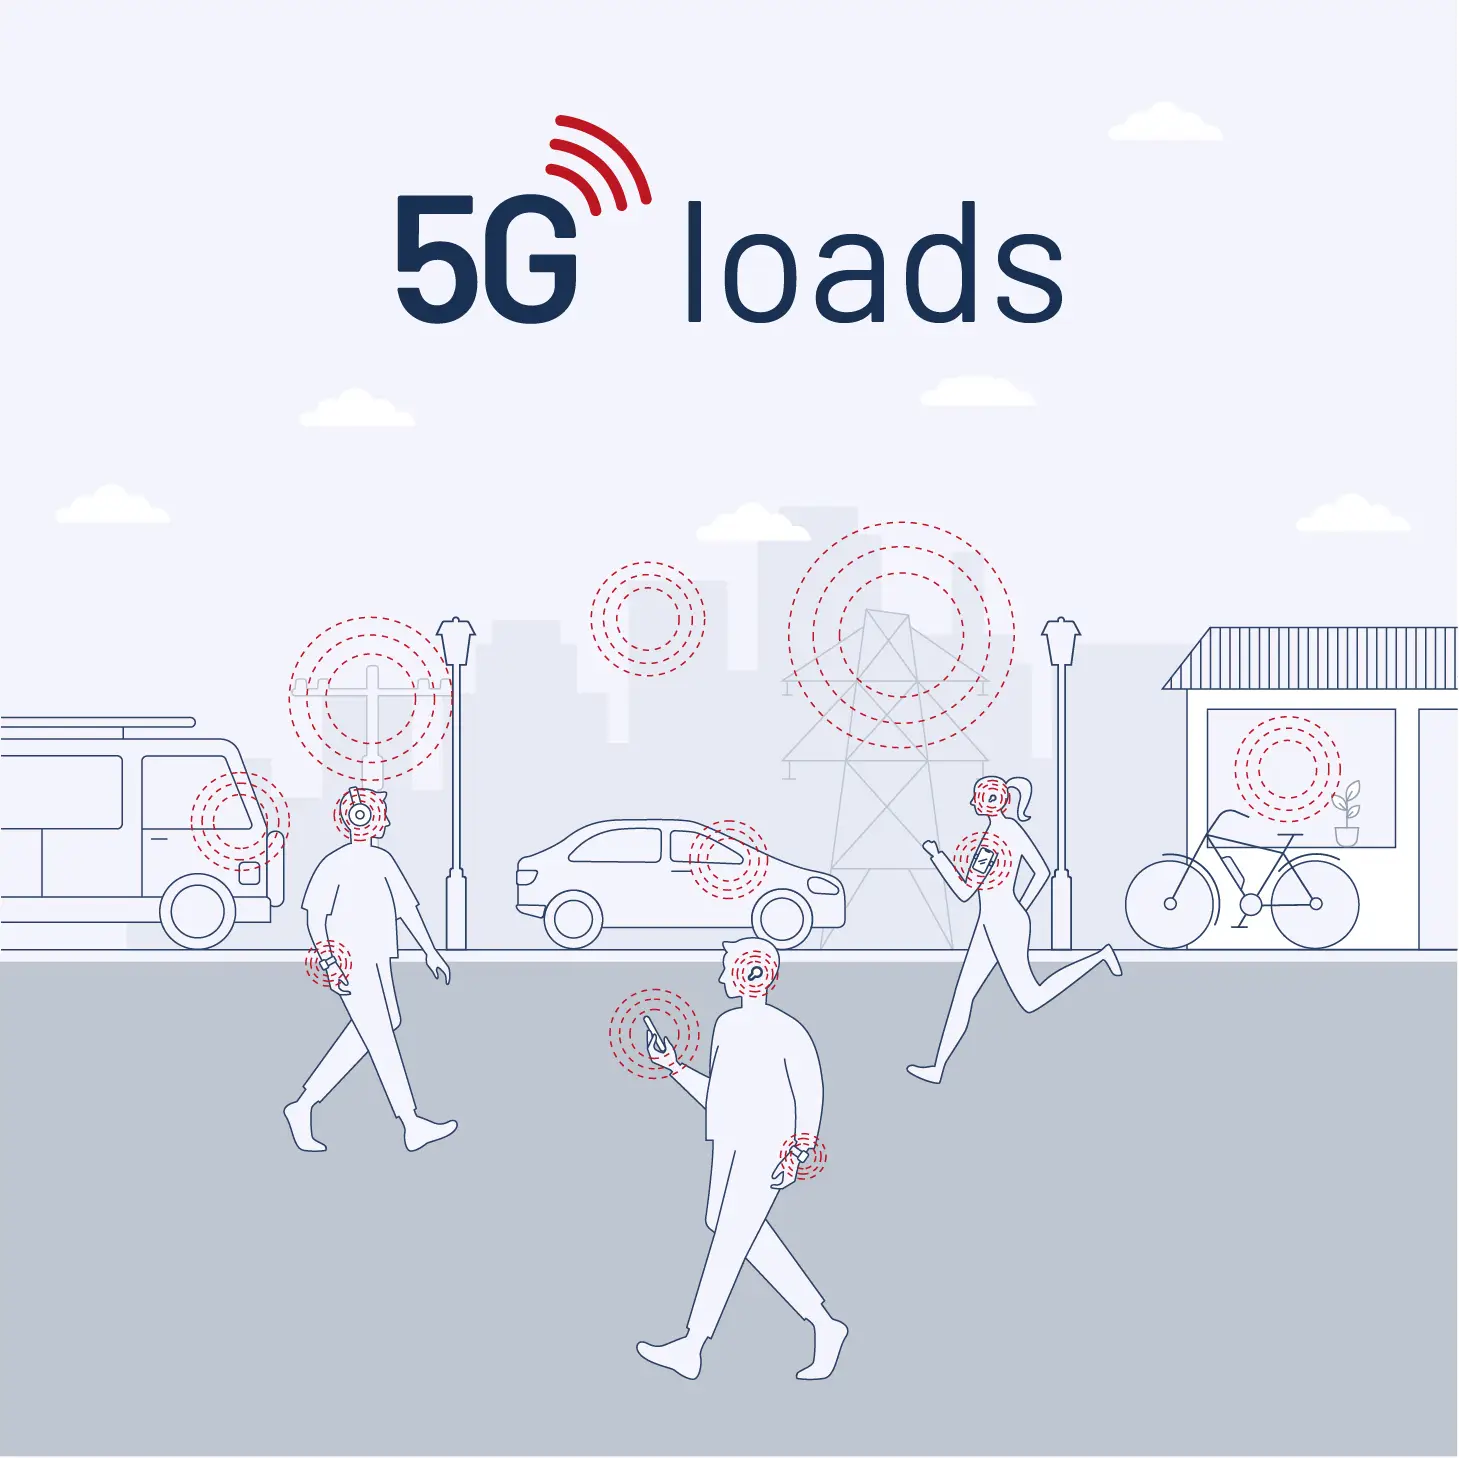 Graphical representation of 5G loads